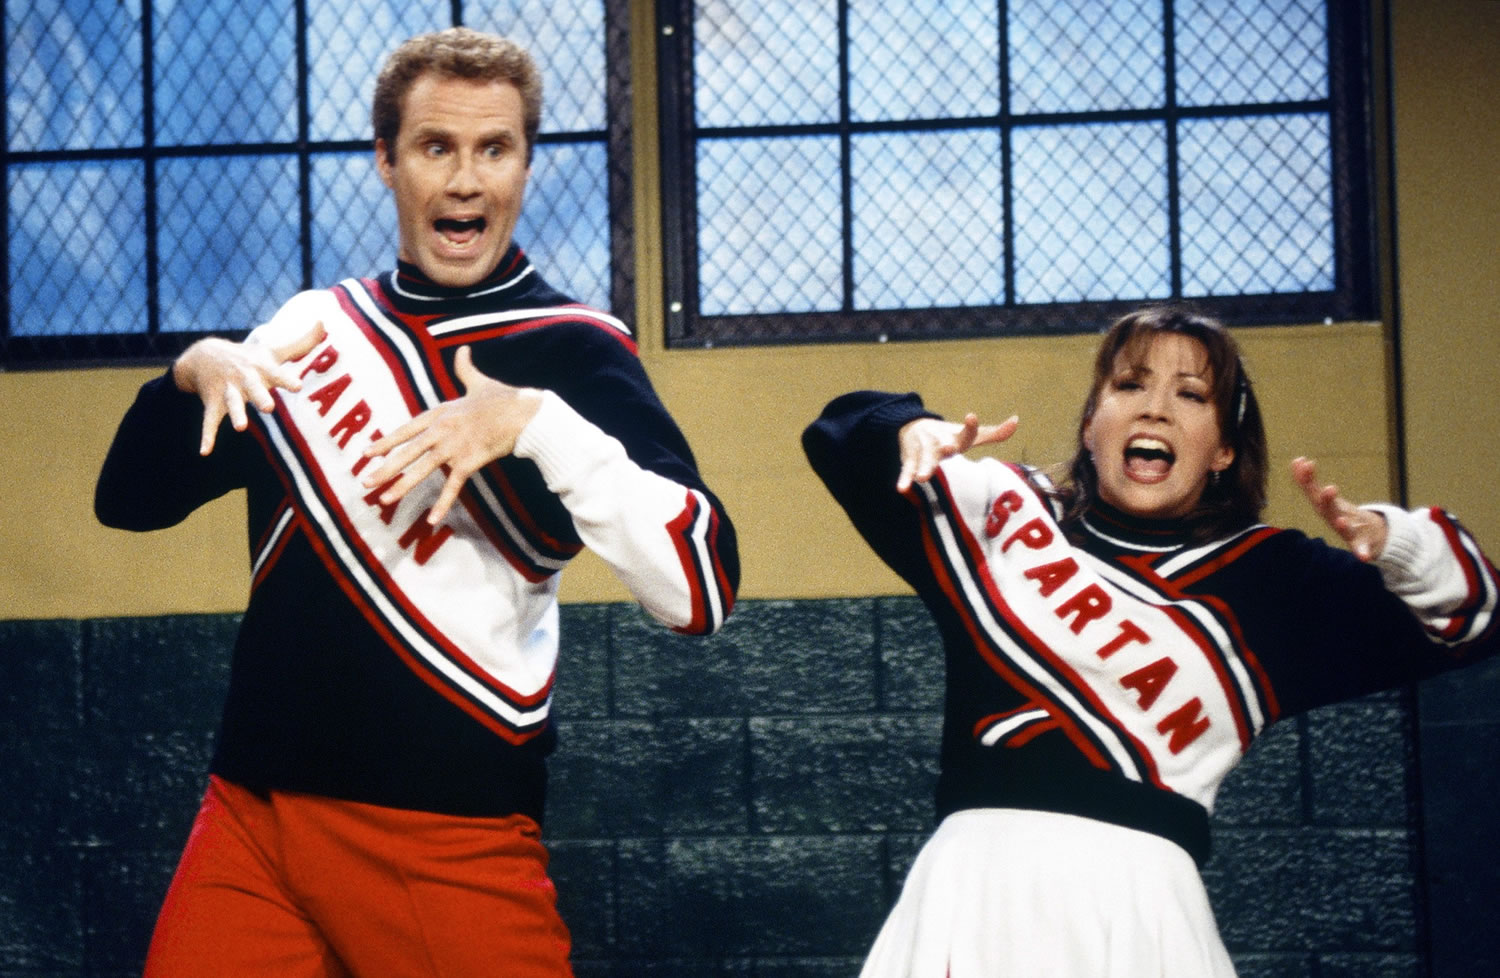 In this Oct. 4, 1977 photo released by NBC, Will Ferrell portrays Craig Buchanan, left, and Cheri Oteri portrays his cheering partner Arianna on &quot;Saturday Night Live,&quot; in New York. The long-running sketch comedy series will celebrate their 40th anniversary with a 3-hour special airing Sunday at 8 p.m. EST on NBC.